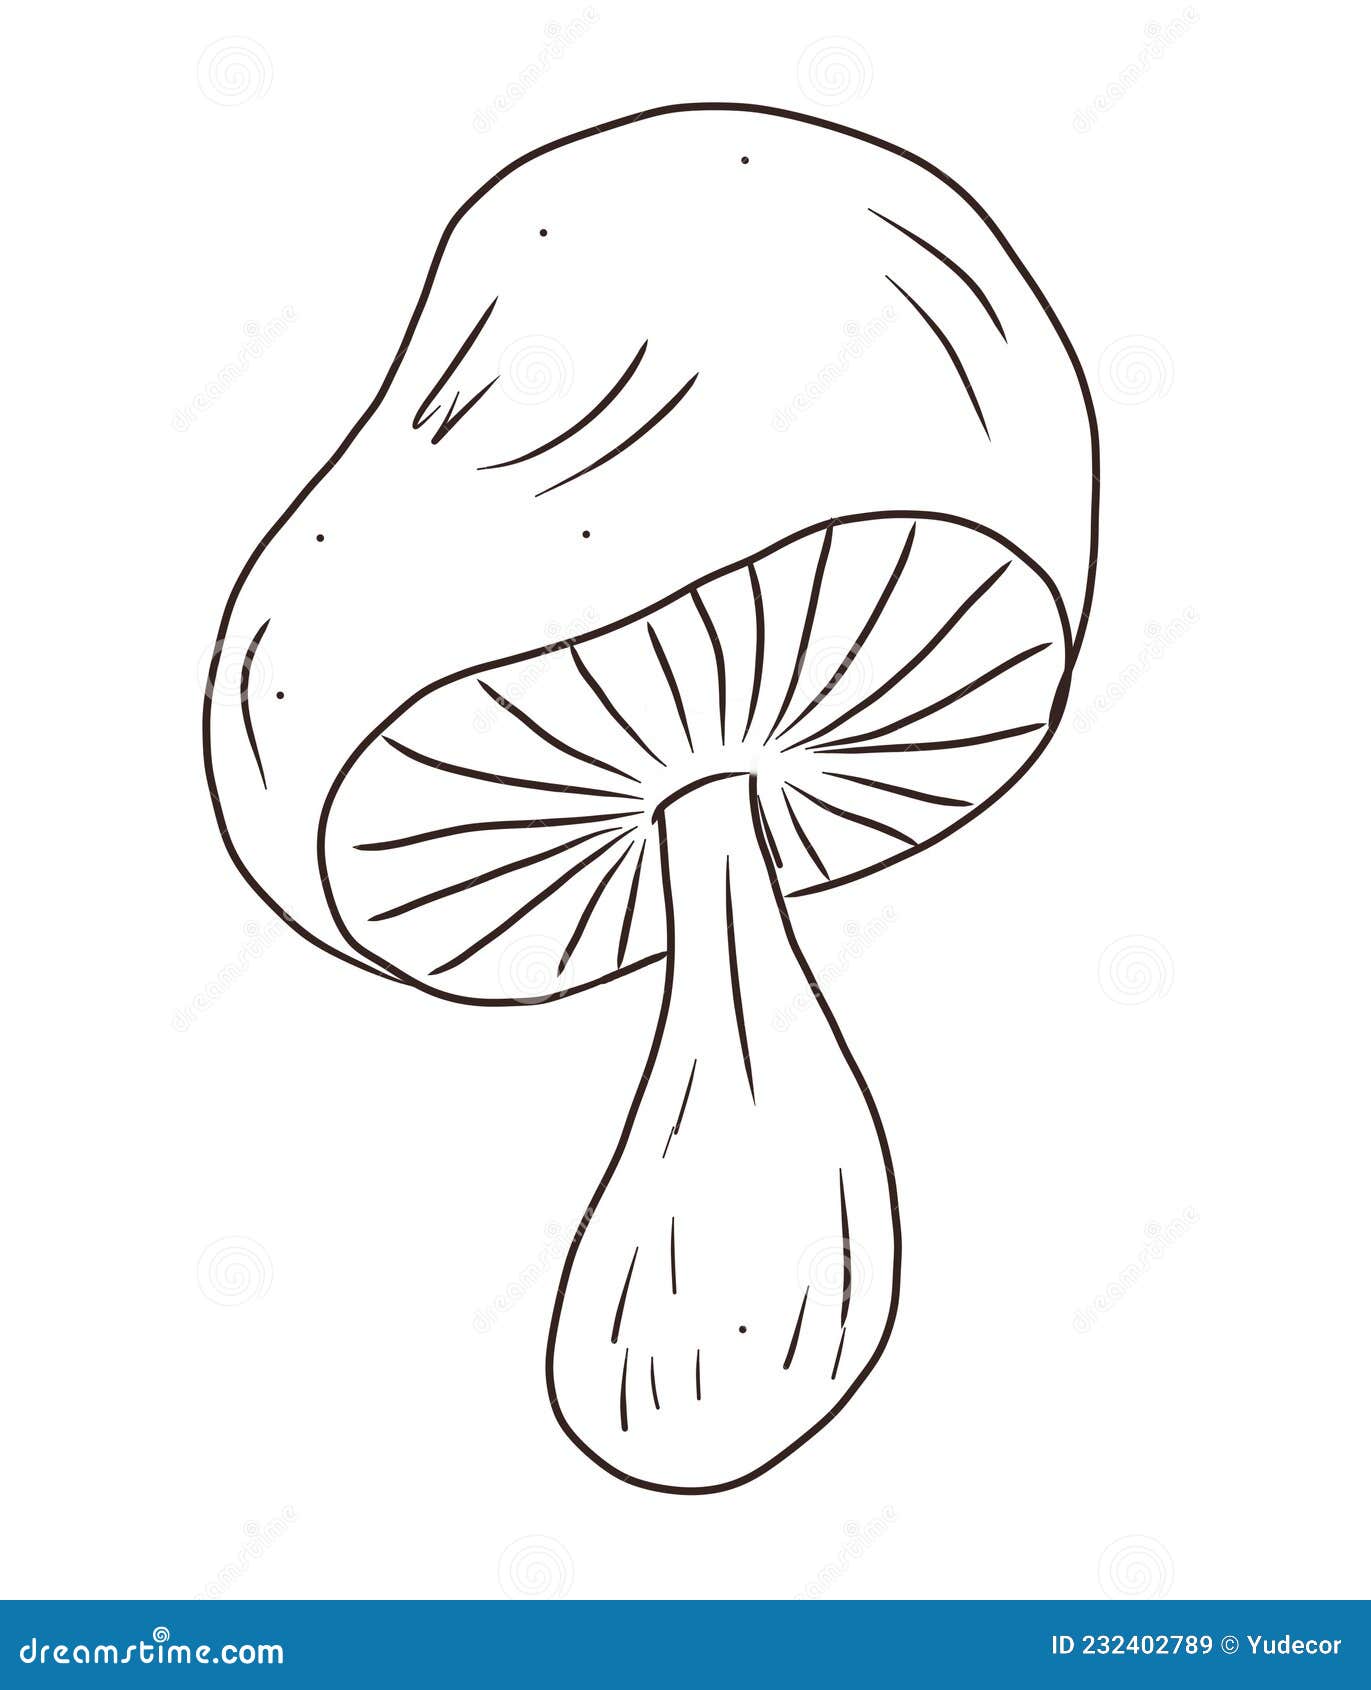 Mushroom Silhouette, Hand Drawing Illustration. Isolated on White ...